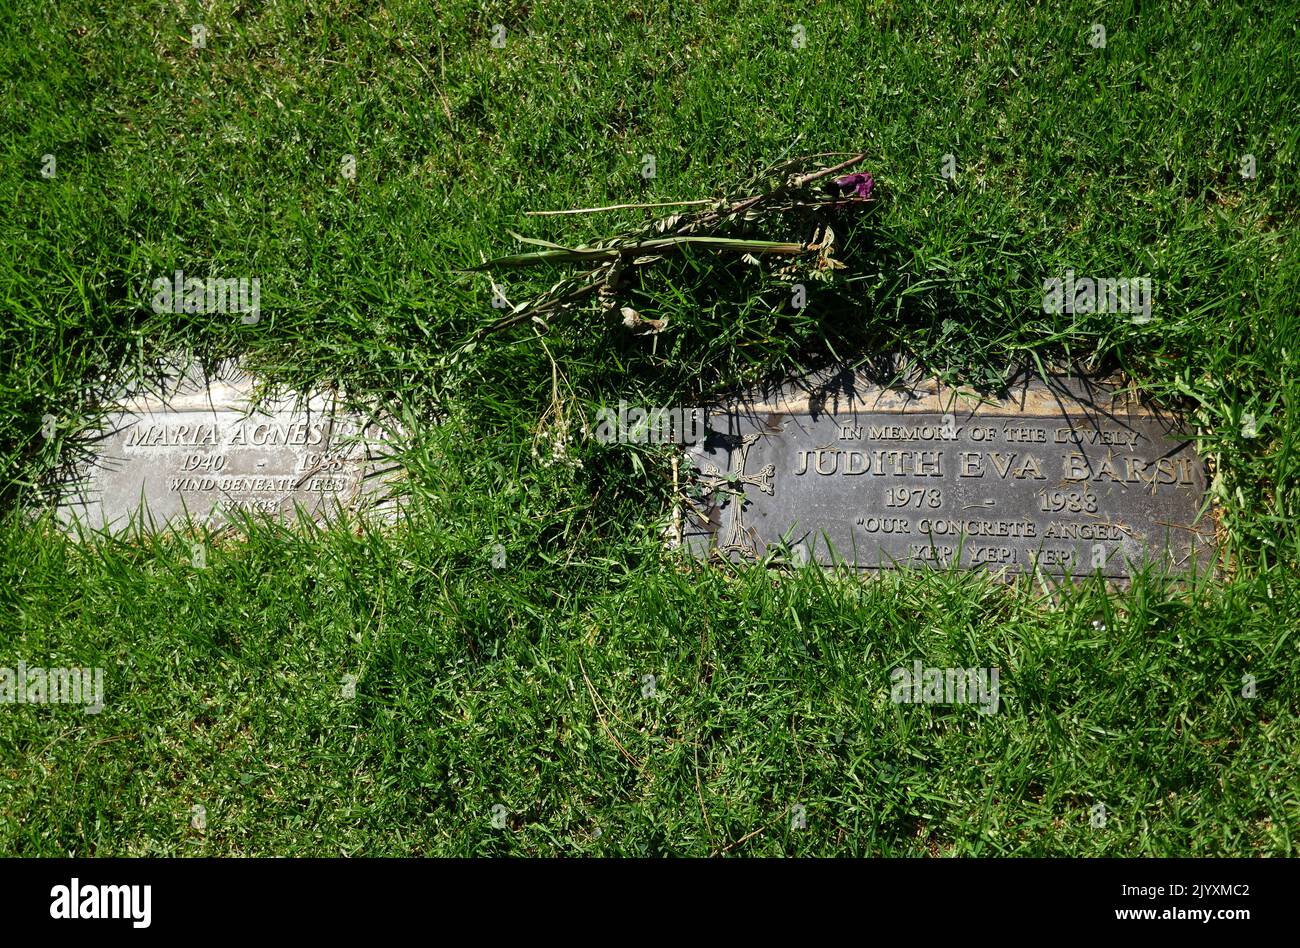 Los Angeles, California, USA 6th September 2022 Child Actress/murder victim Judith Barsi's Grave and mother/murder victim Maria Agnes Benko Barsi's Grave in Sheltering Hills Section at Forest Lawn Memorial Park Hollywood Hills on September 6, 2022 in Los Angeles, California, USA. Photo by Barry King/Alamy Stock Photo Stock Photo